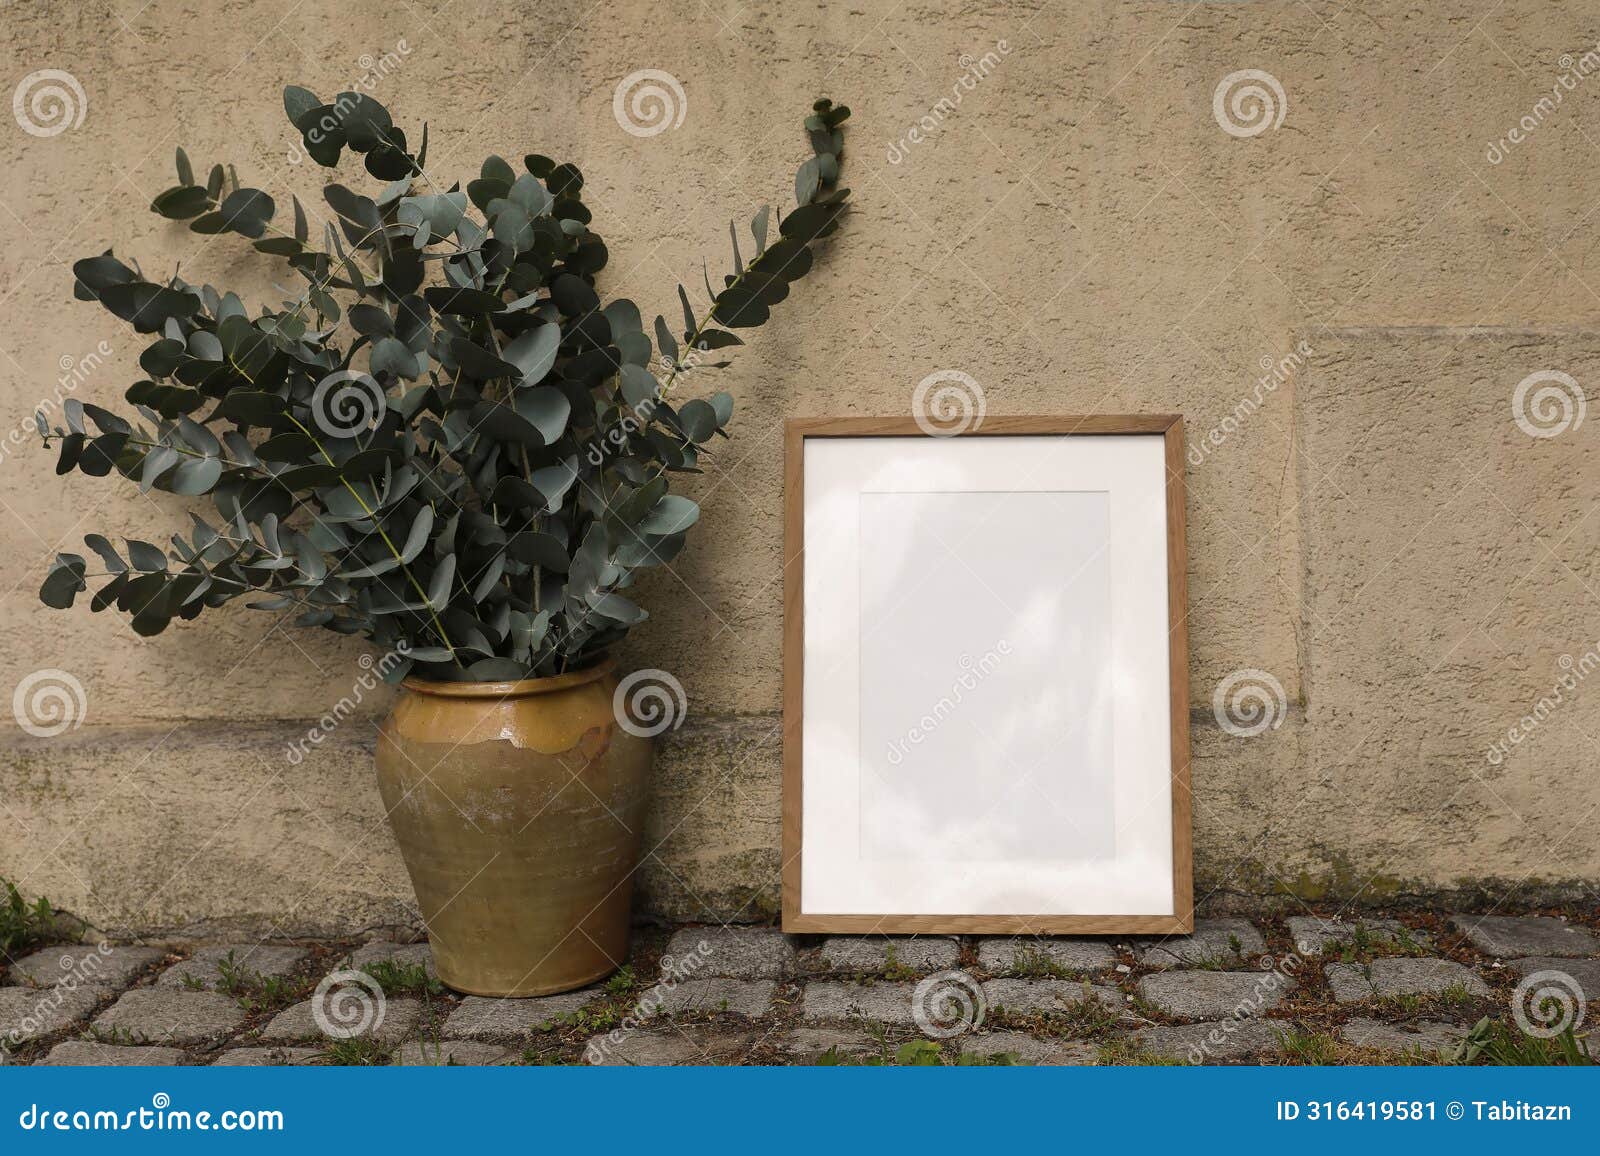 blank wooden picture frame mockup against old ochre textured white wall. a4, a3, a2 poster template. vintage vase, pot